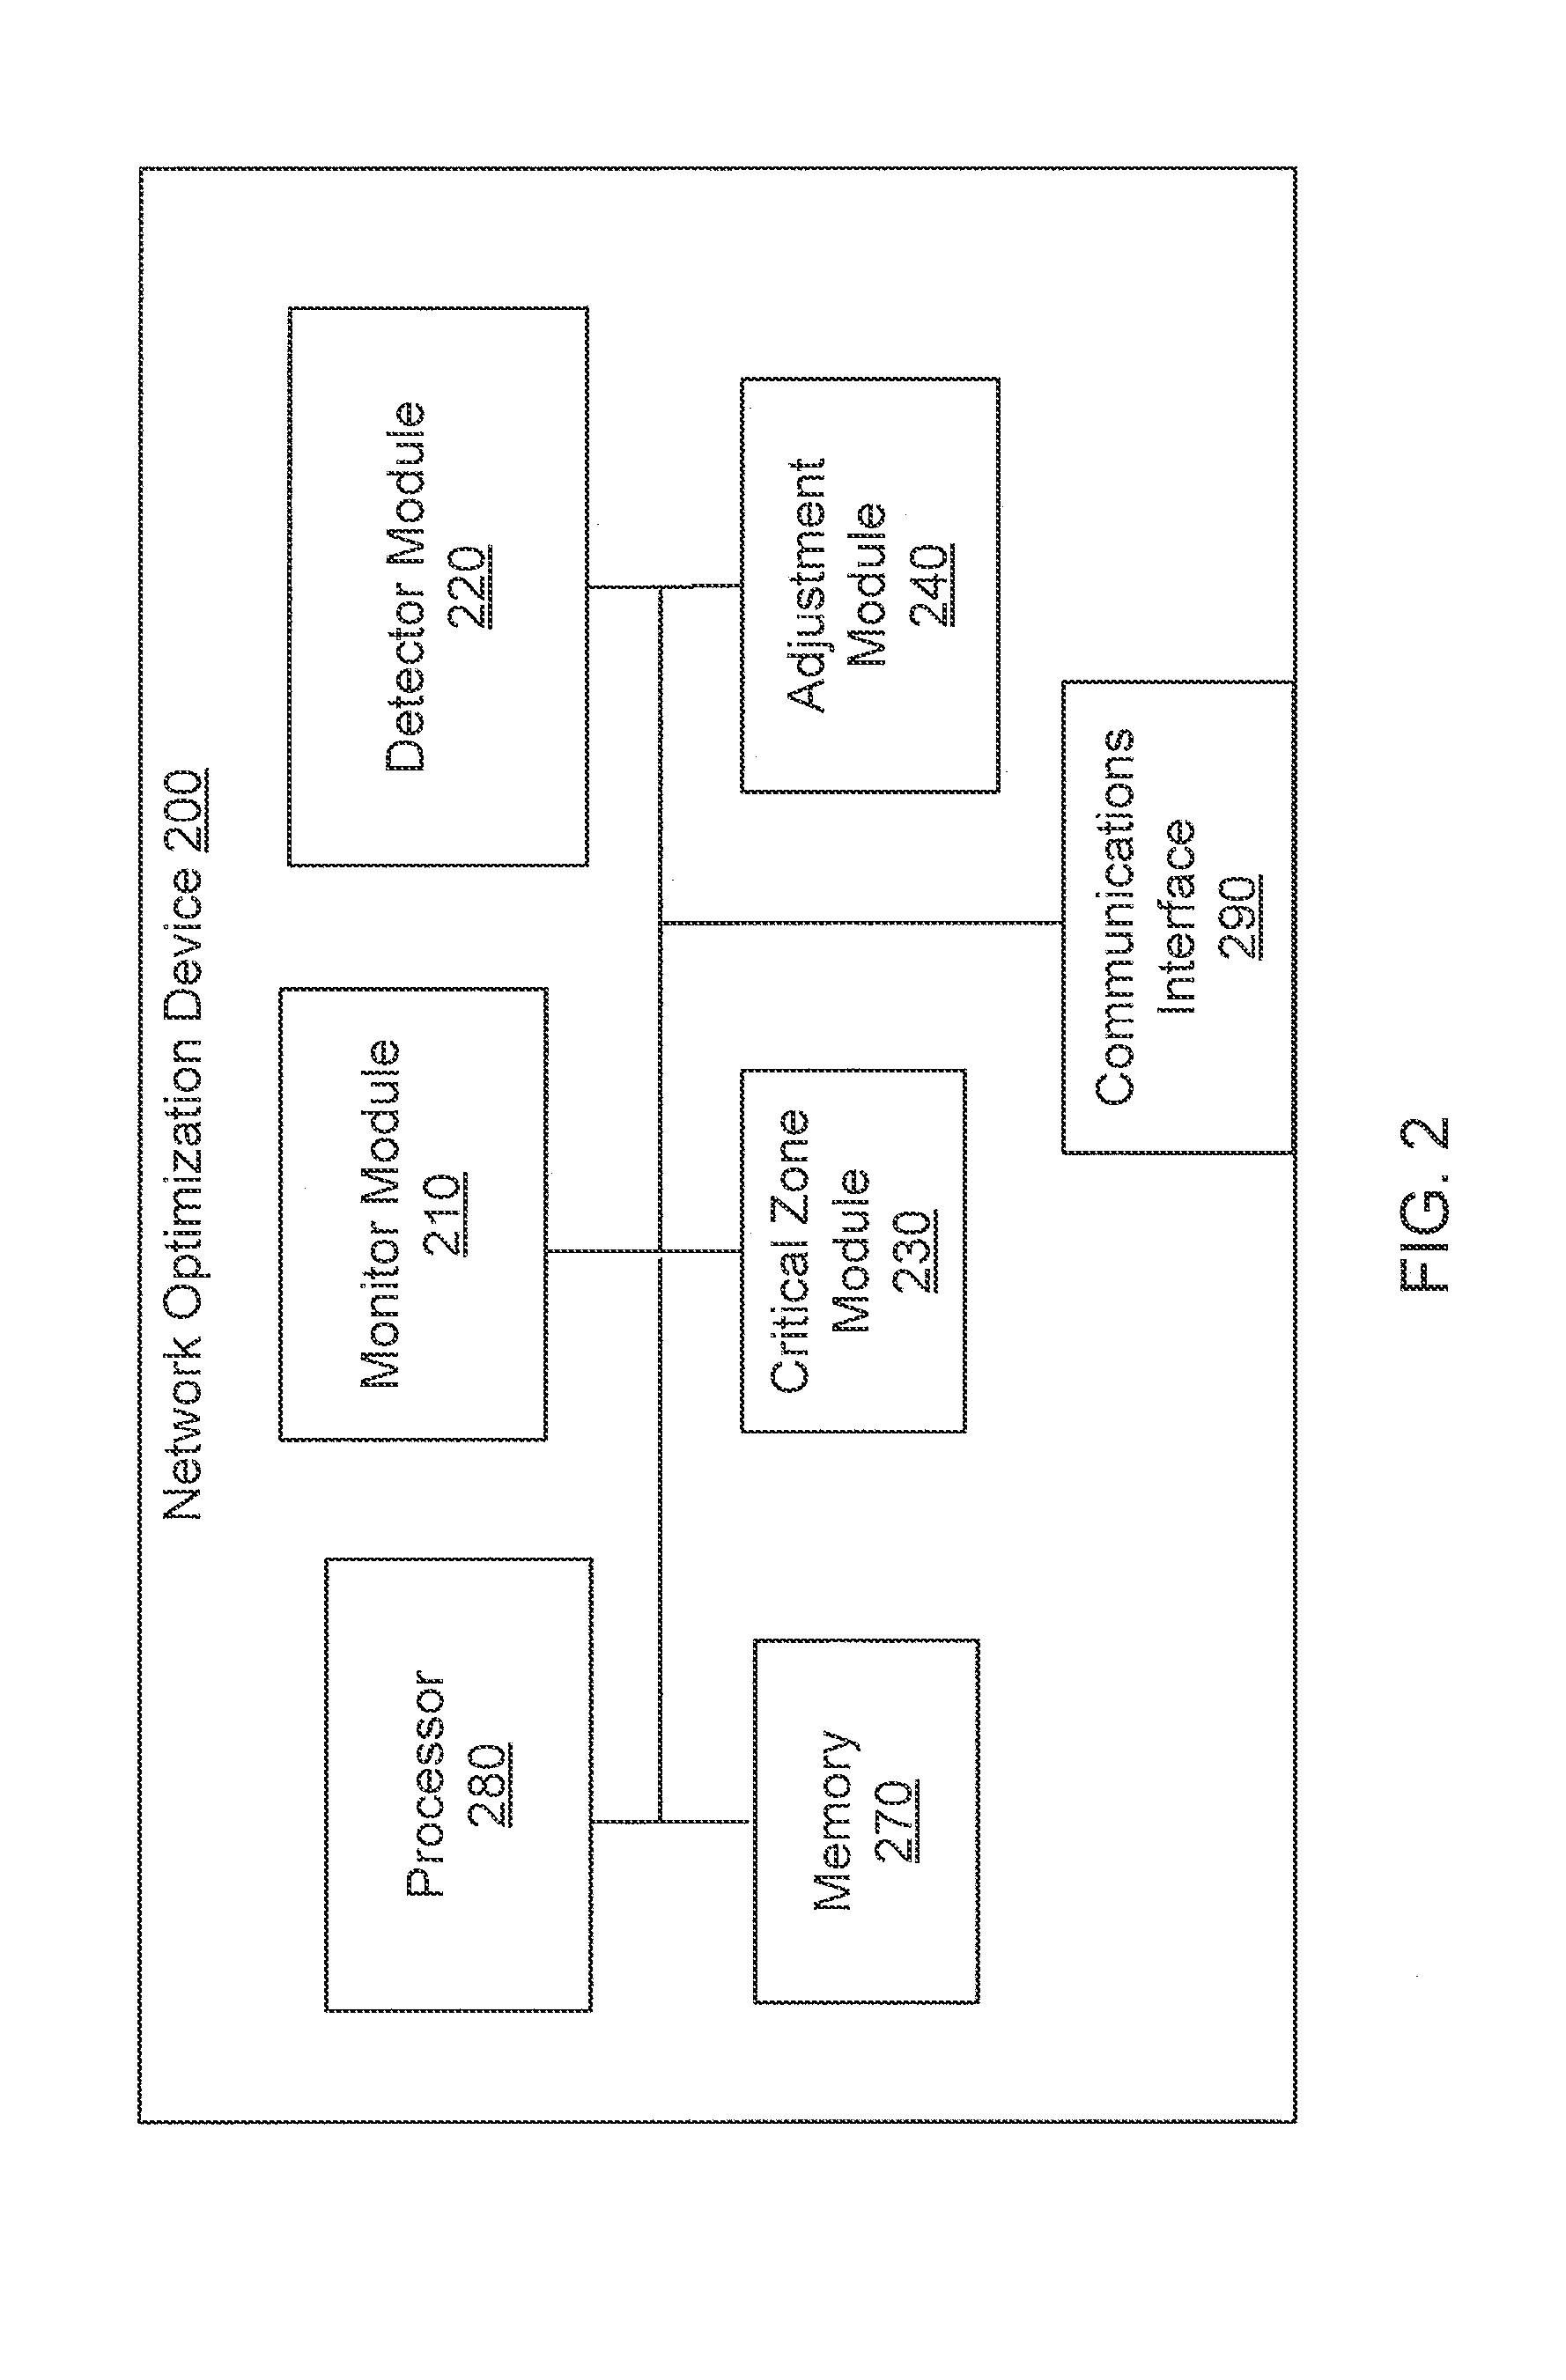 Methods and apparatus for underperforming cell detection and recovery in a wireless network